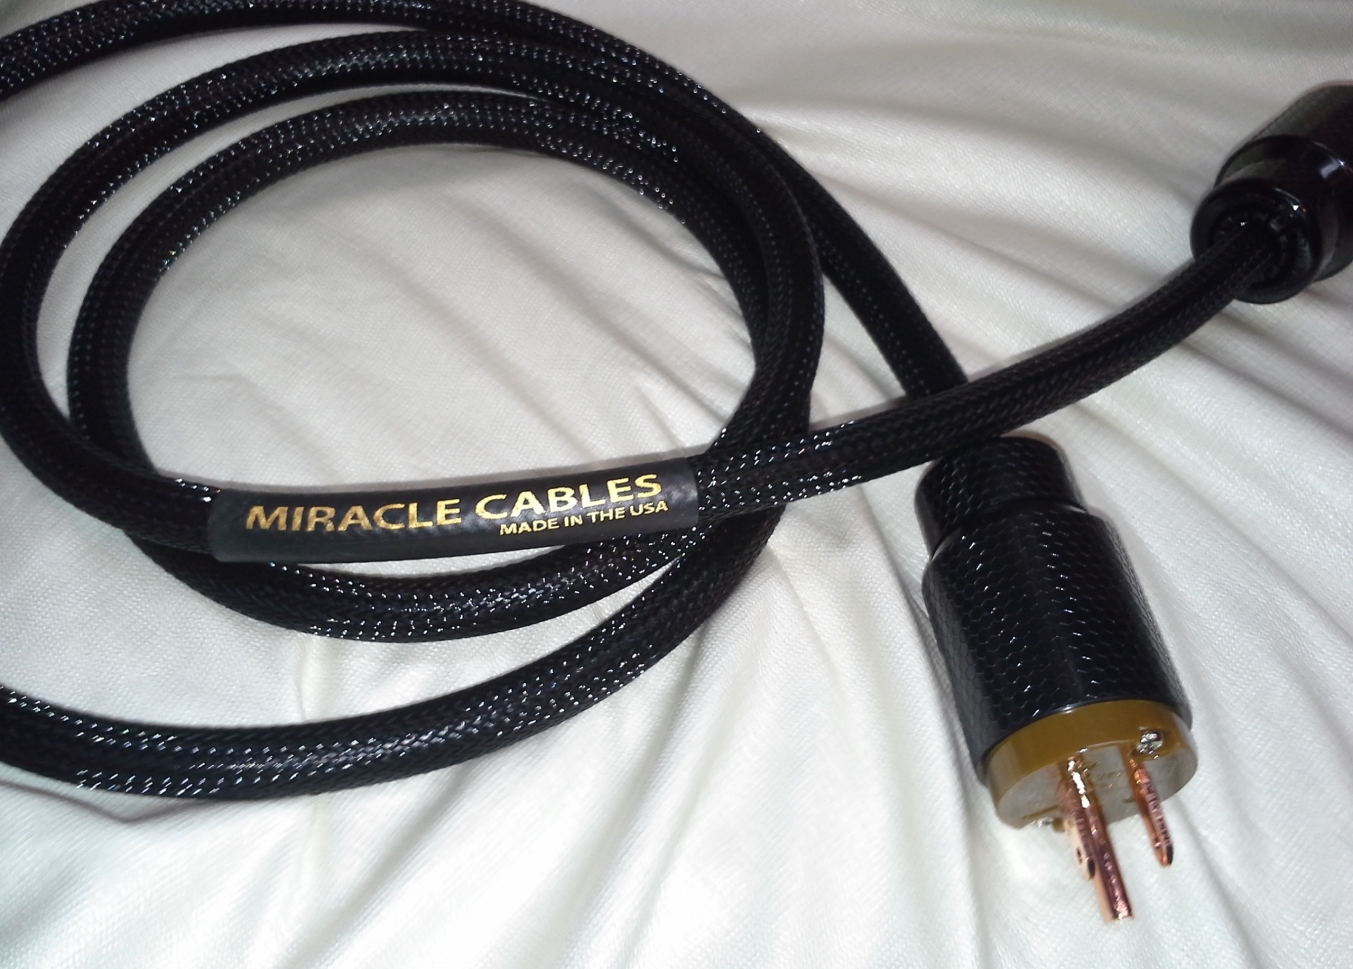 http://www.miracle-cables.com/MIRACLE%20POWER%20CABLE.jpg